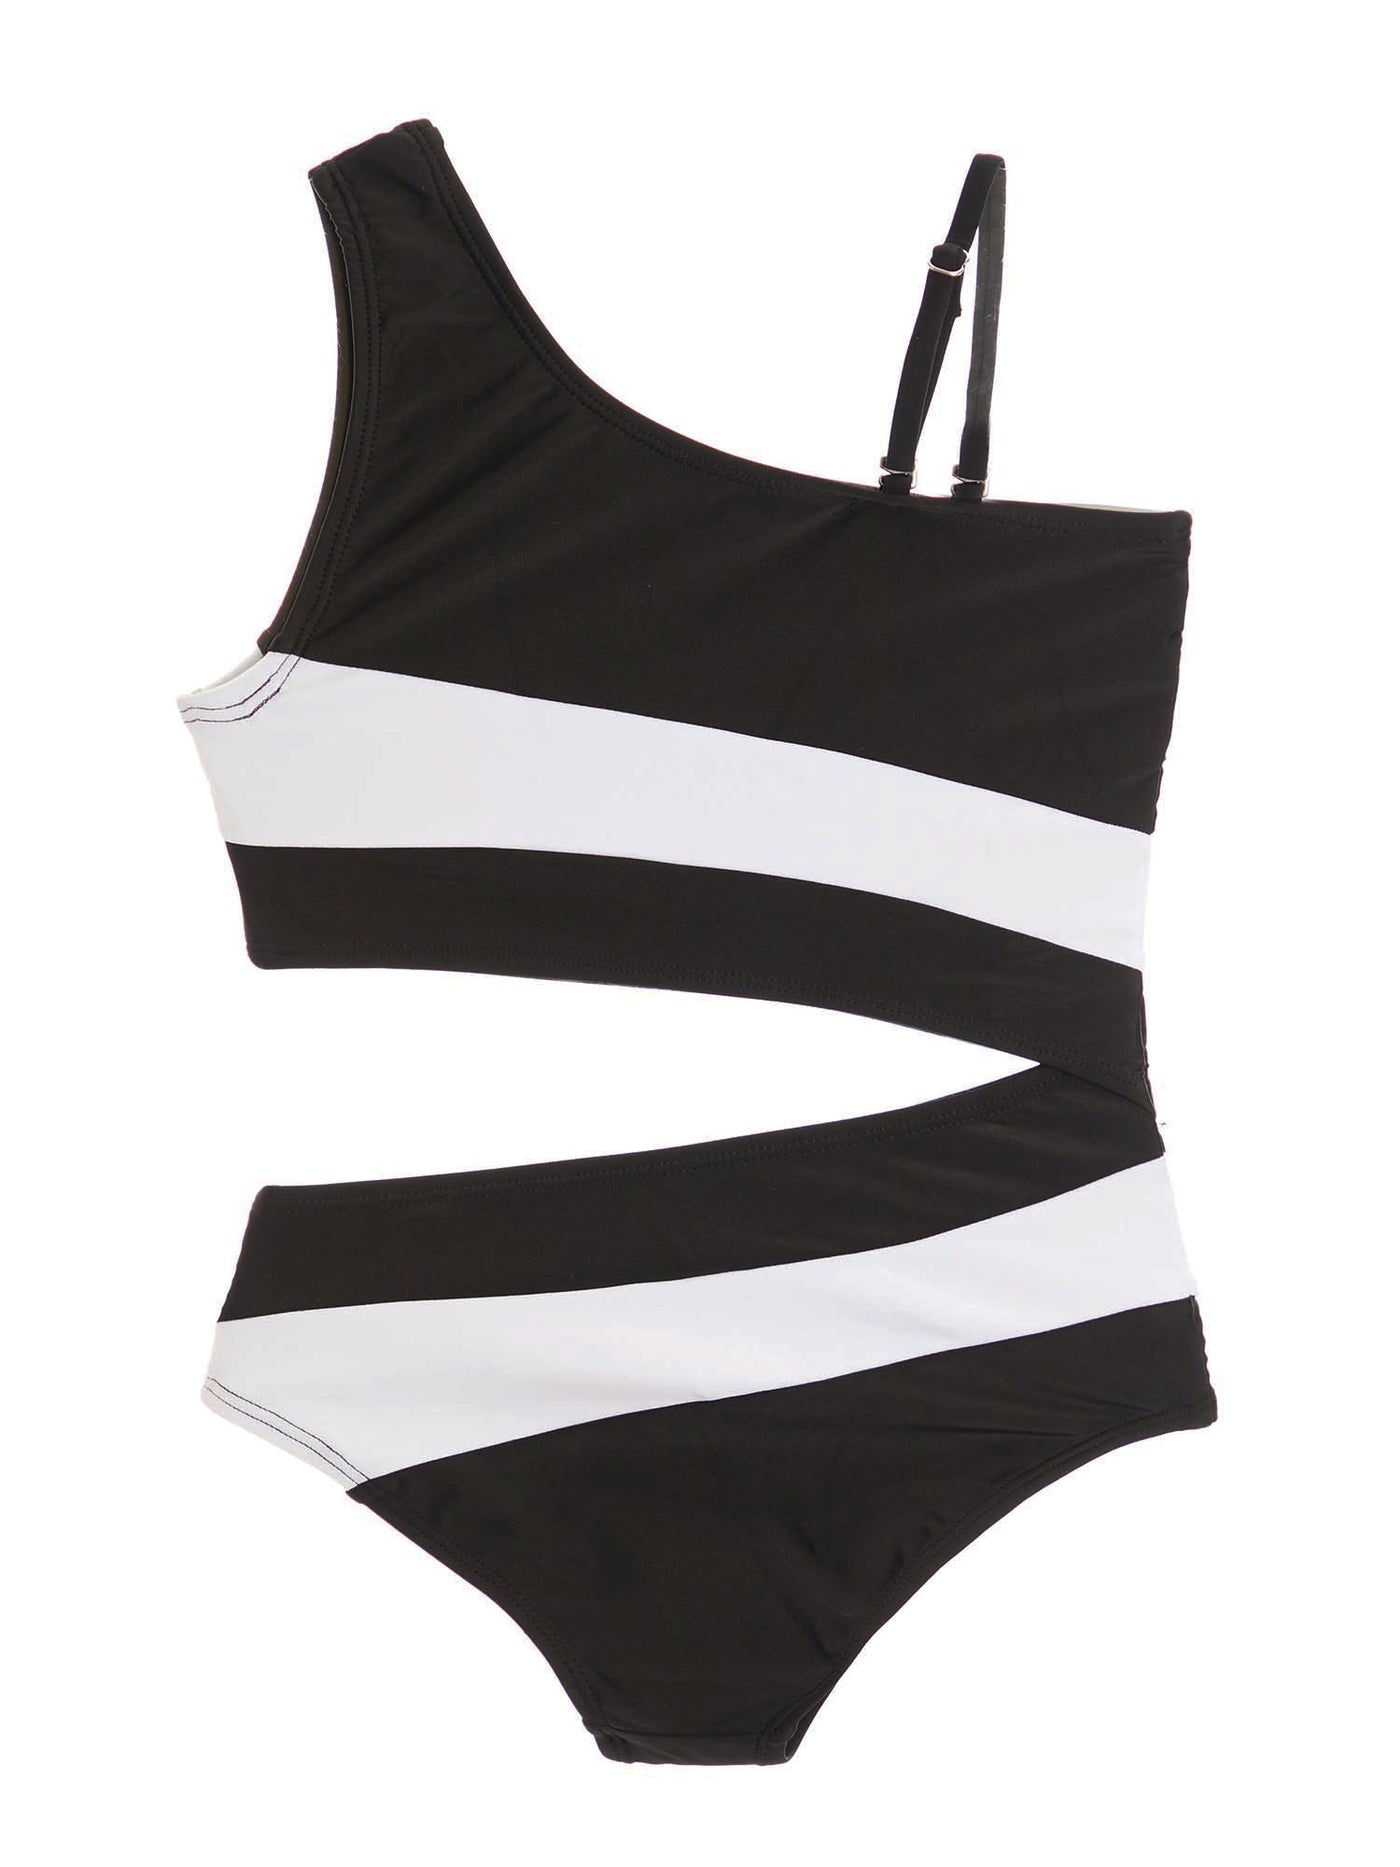 LEANEL-One piece side cut out swimsuit